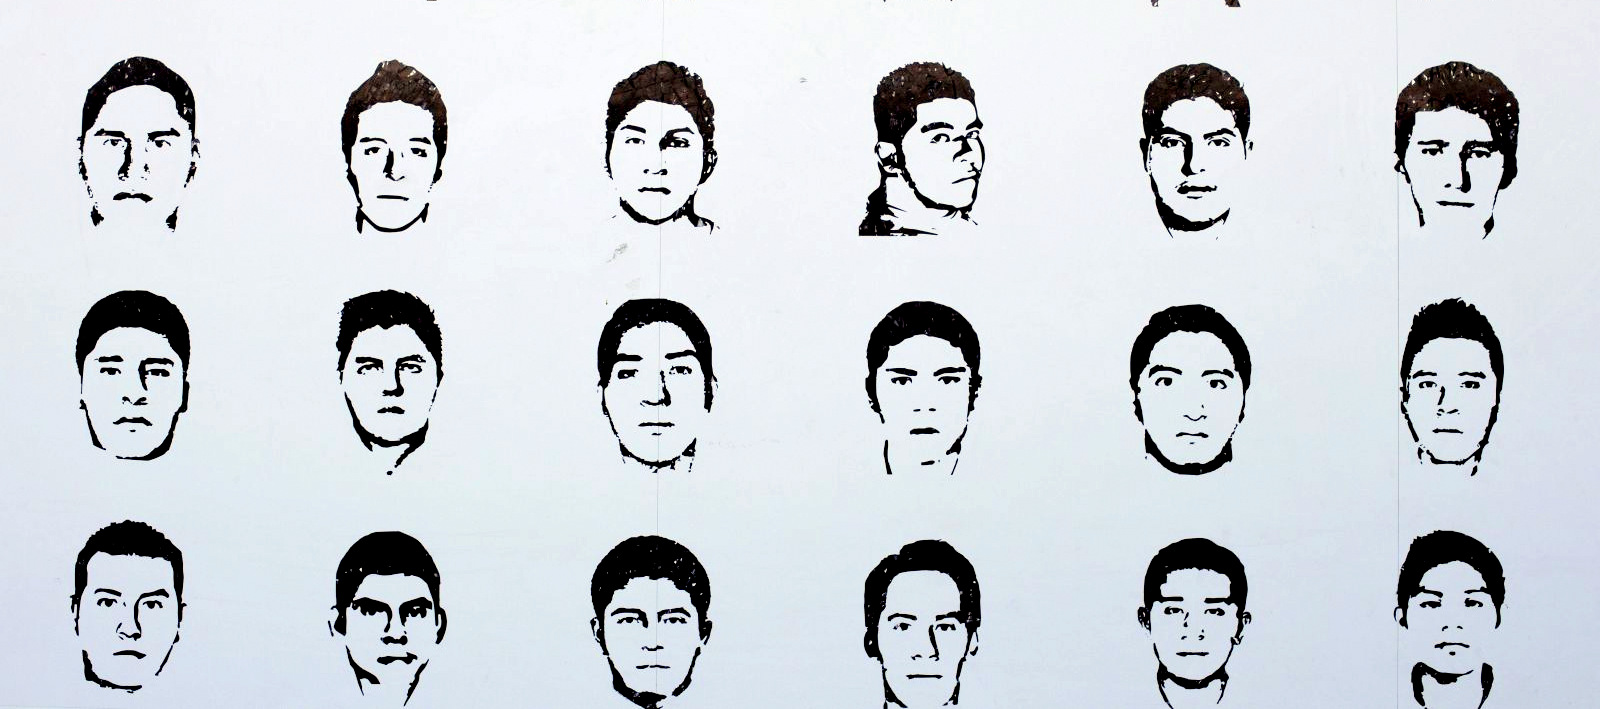 Portraits of missing students depicted on a billboard at a protest camp inside Mexico City's main square. (Rebecca Blackwell/AP)